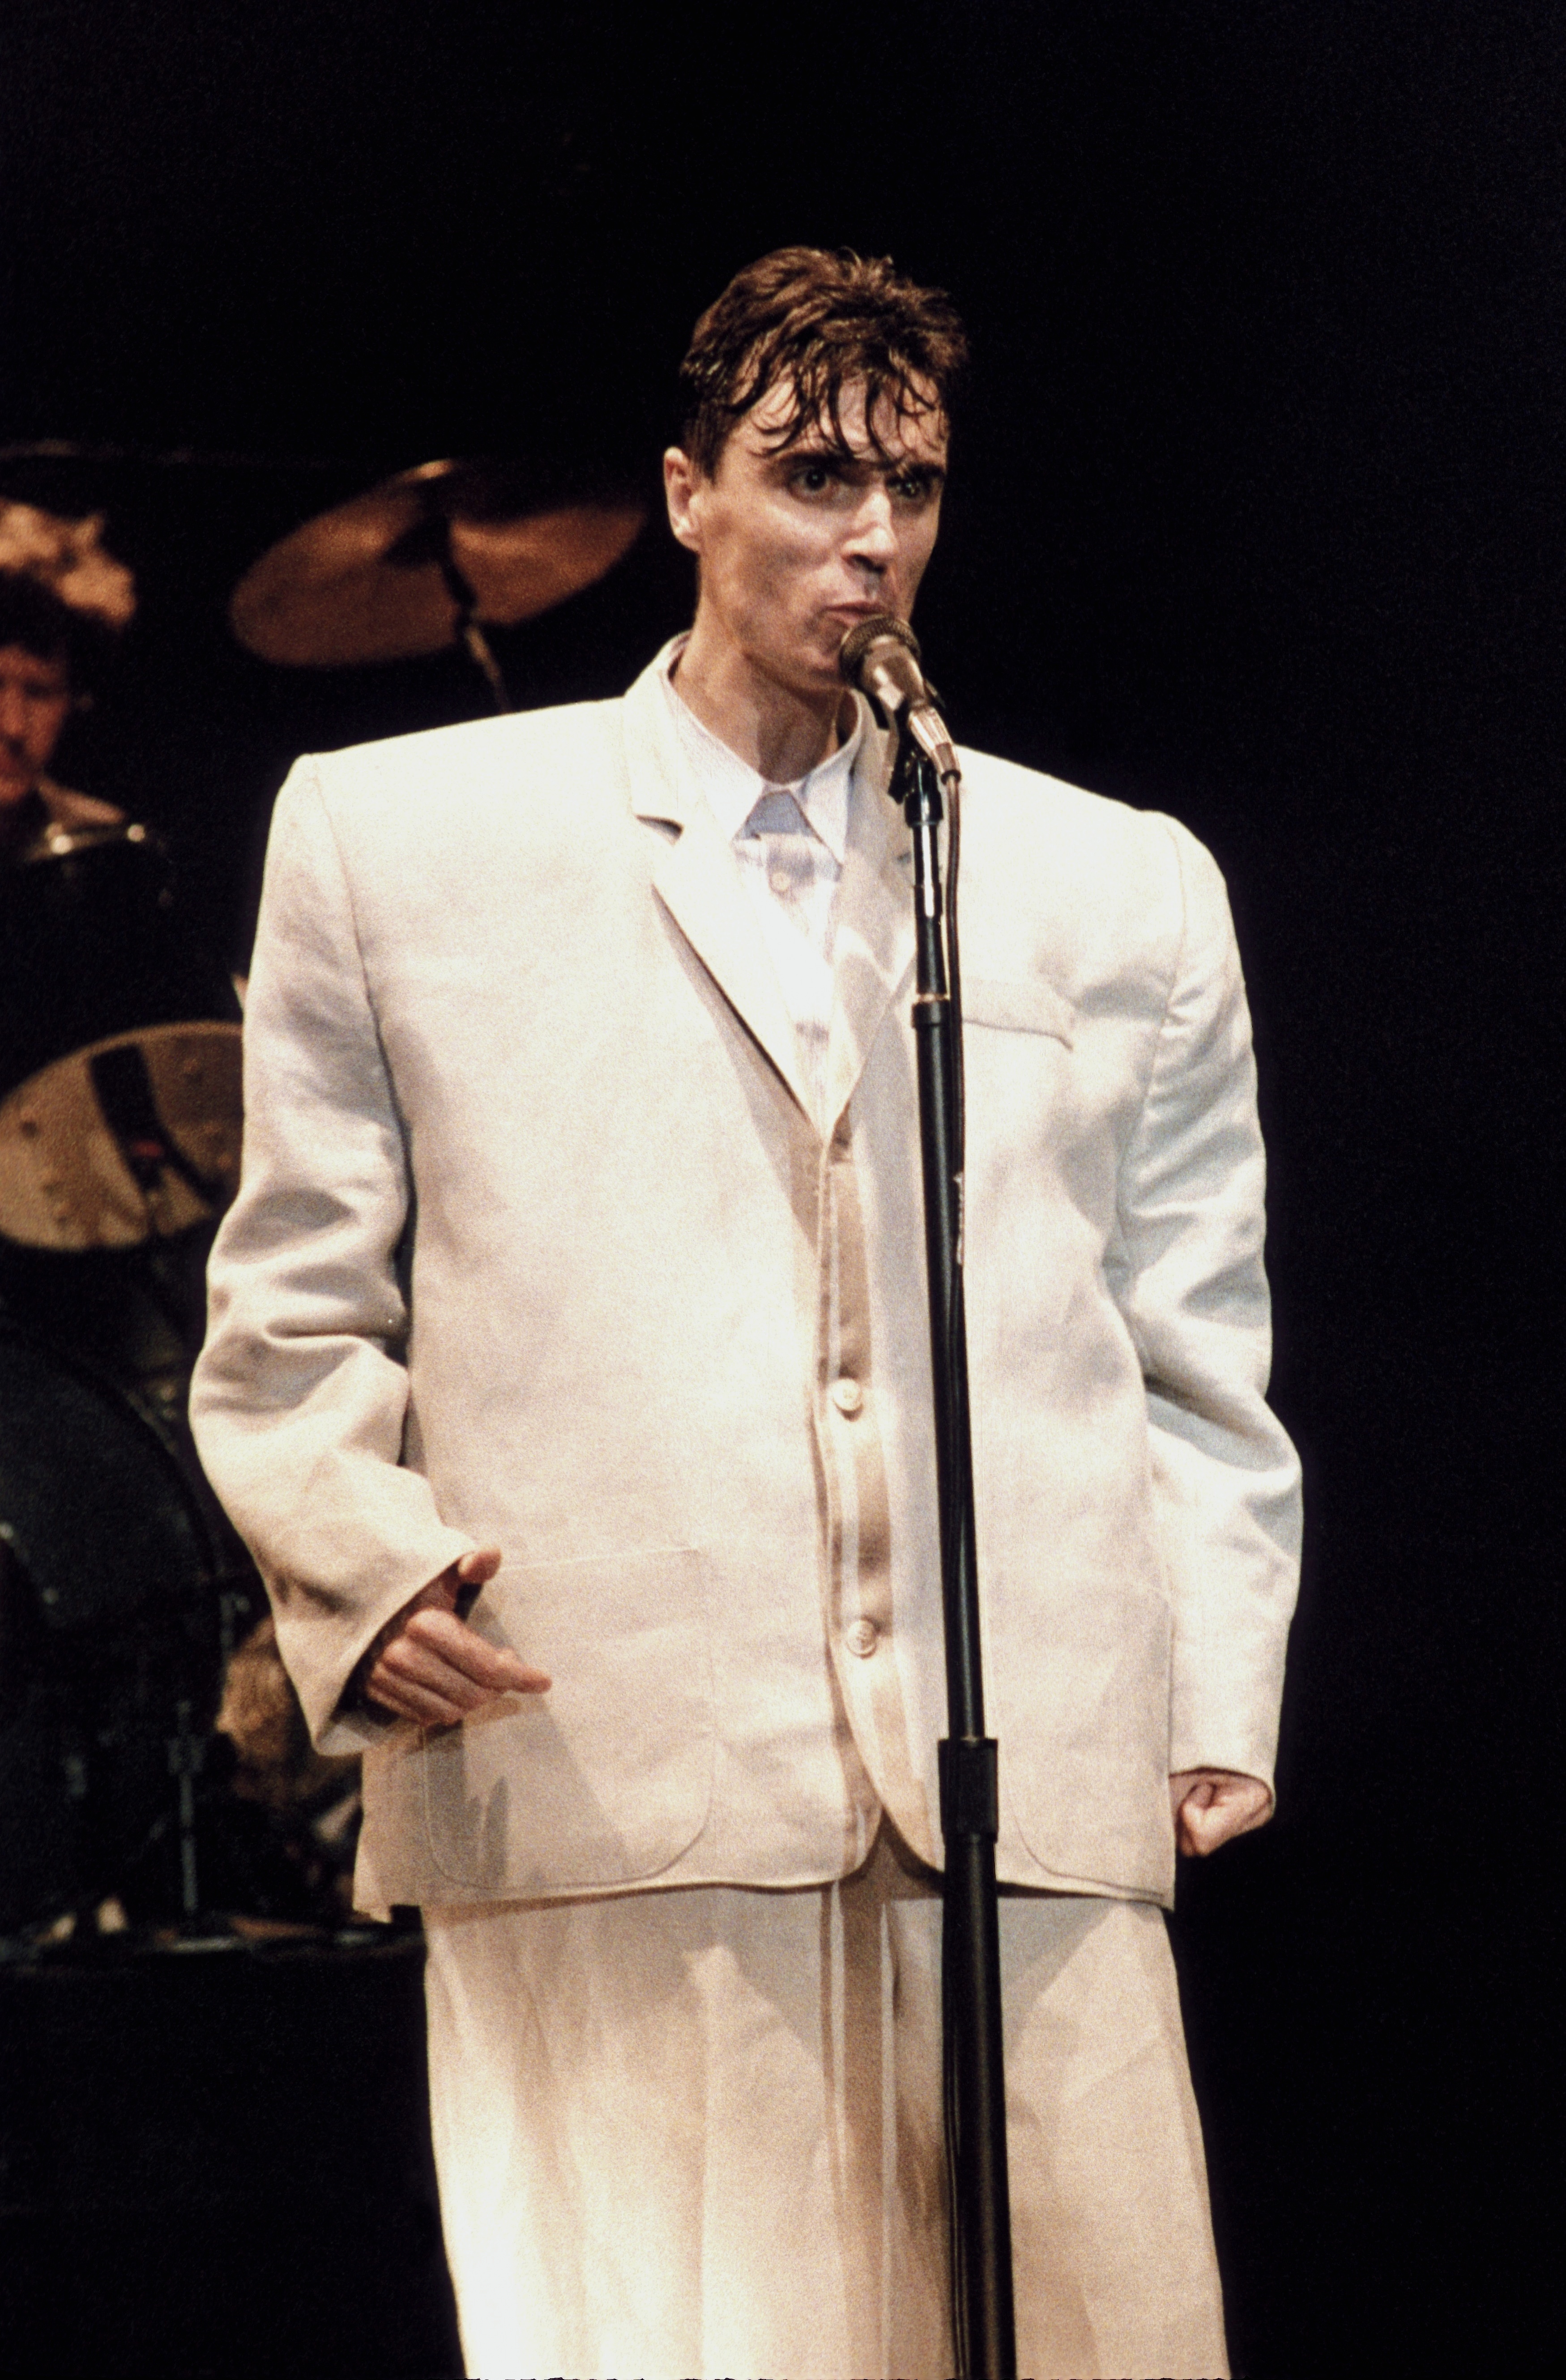 David Byrne performing with the Talking Heads in 1985